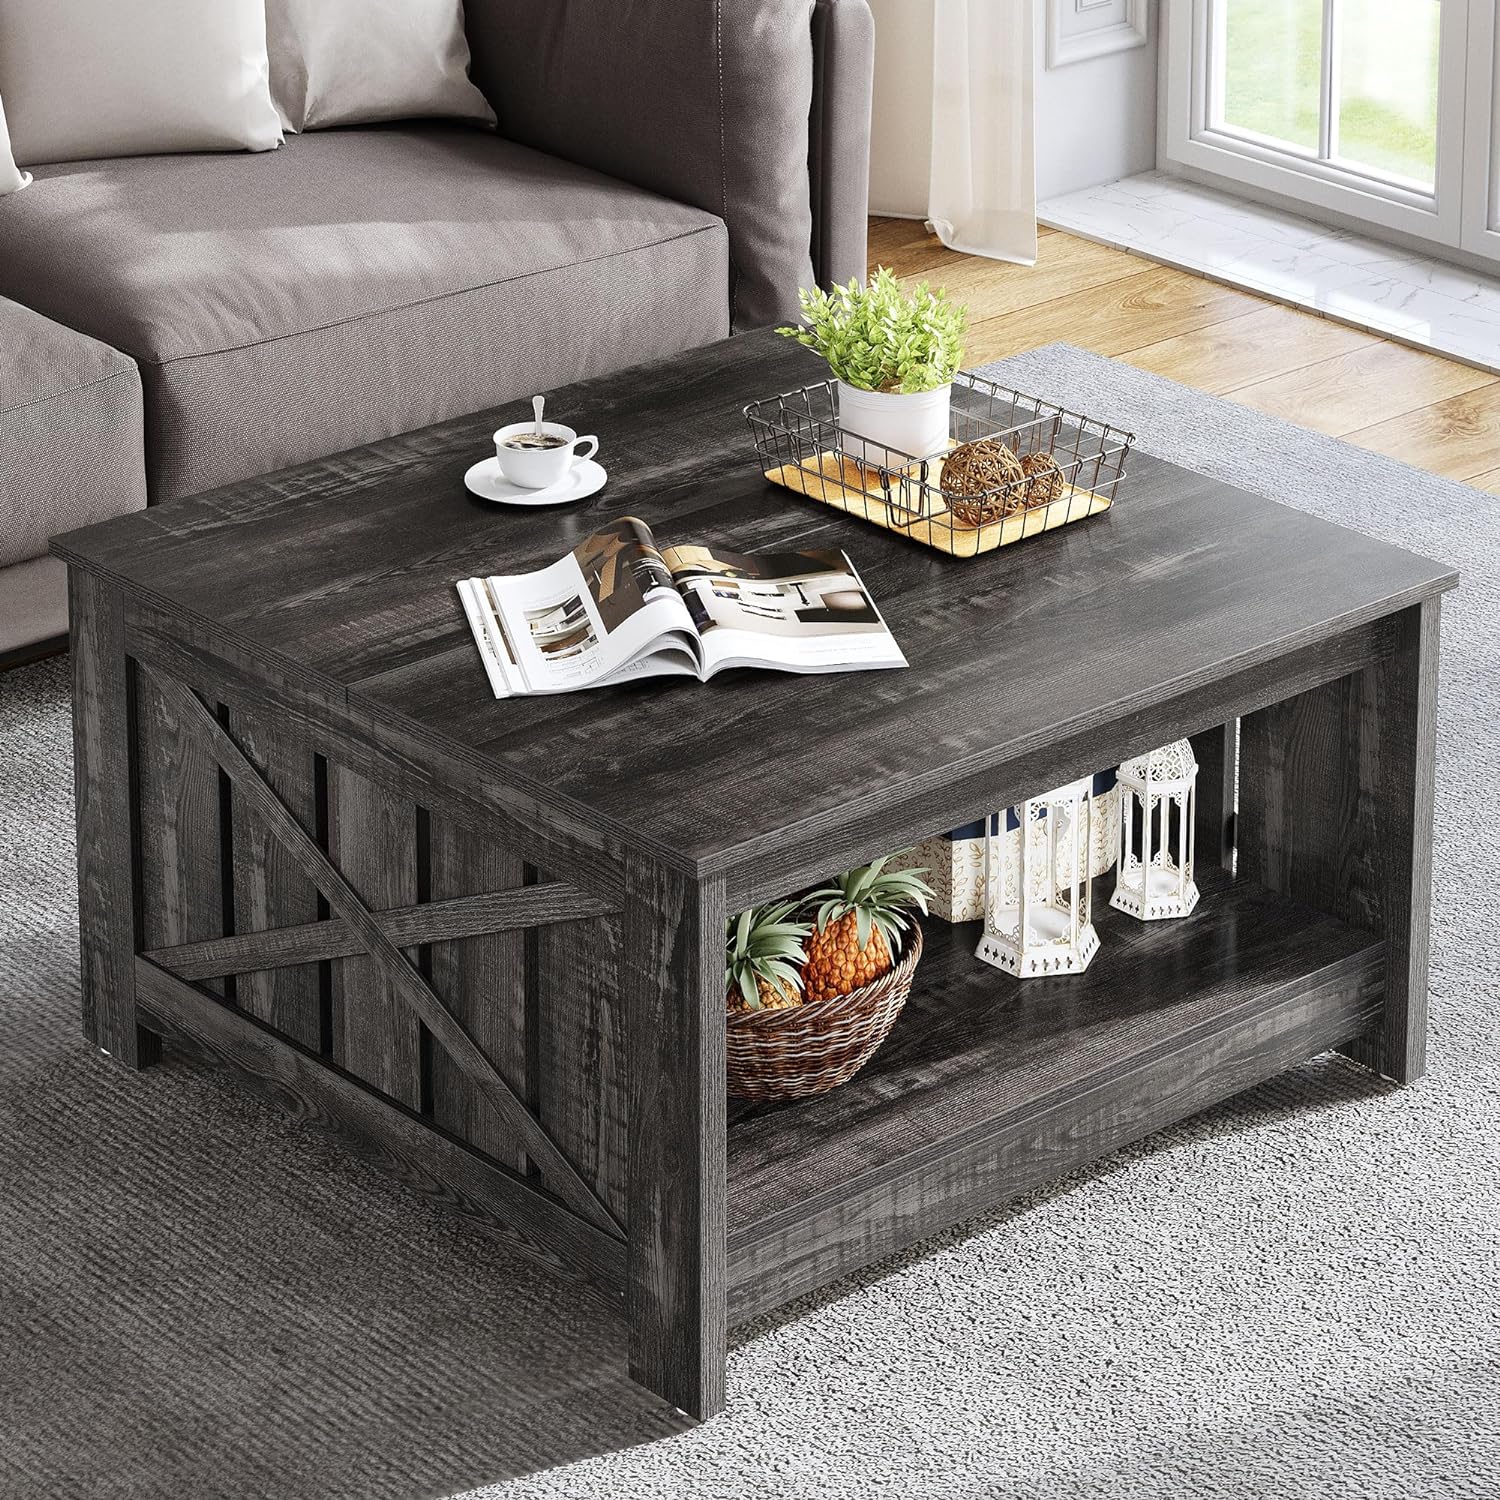 I couldnt be happier with my purchase of the rustic farmhouse coffee table! This charming piece has brought an enchanting touch to my living room, transforming it into a cozy haven.First and foremost, the craftsmanship is impeccable. The solid wood construction exudes durability and authenticity, making it a true standout in any rustic-inspired decor. The distressed finish adds character and tells a story of its own, bringing that sought-after vintage charm right into my home.The design is both